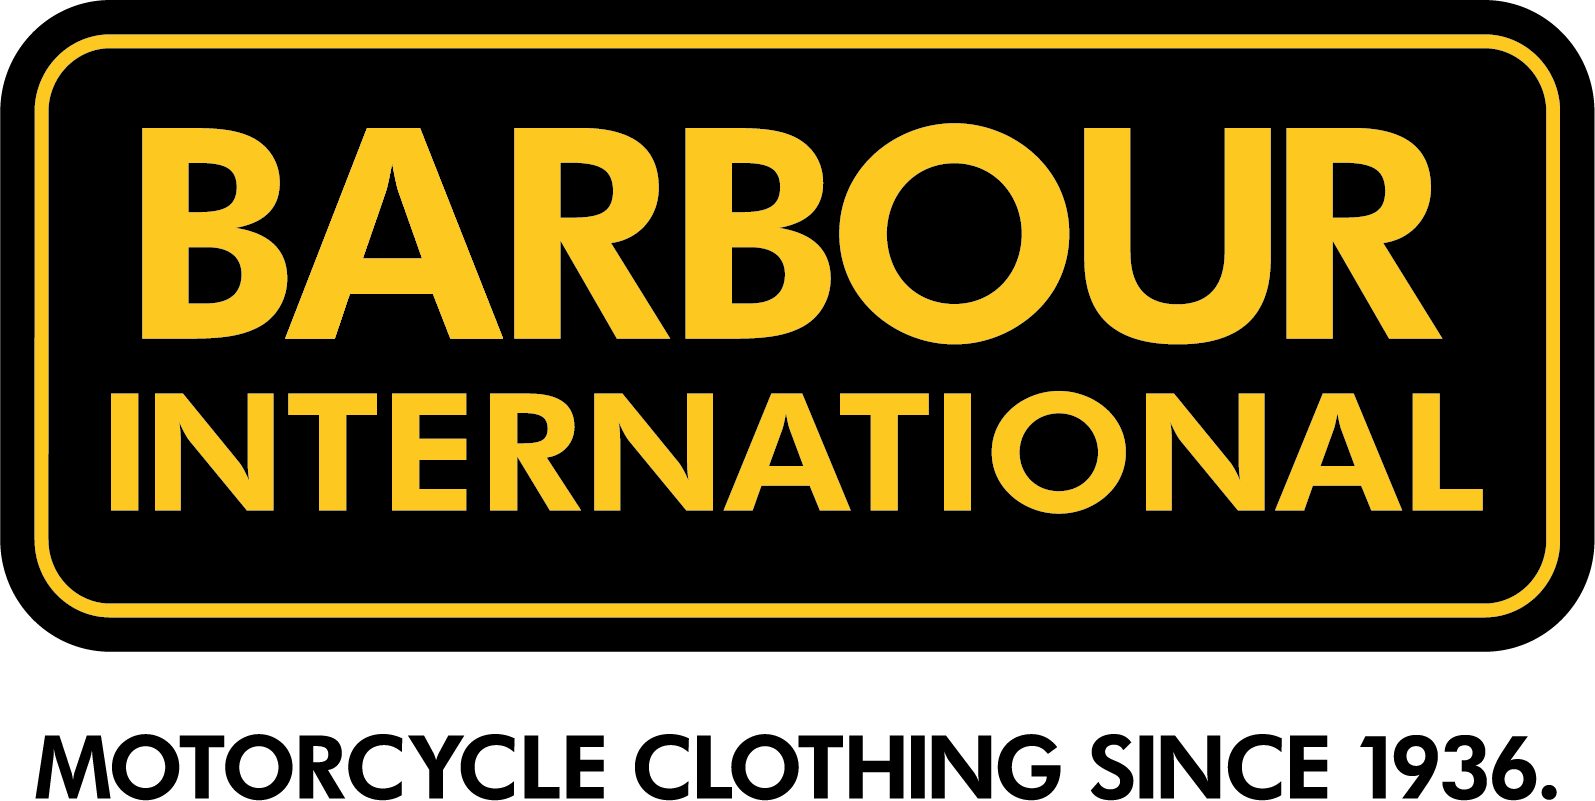 BarbourInt_logo.png